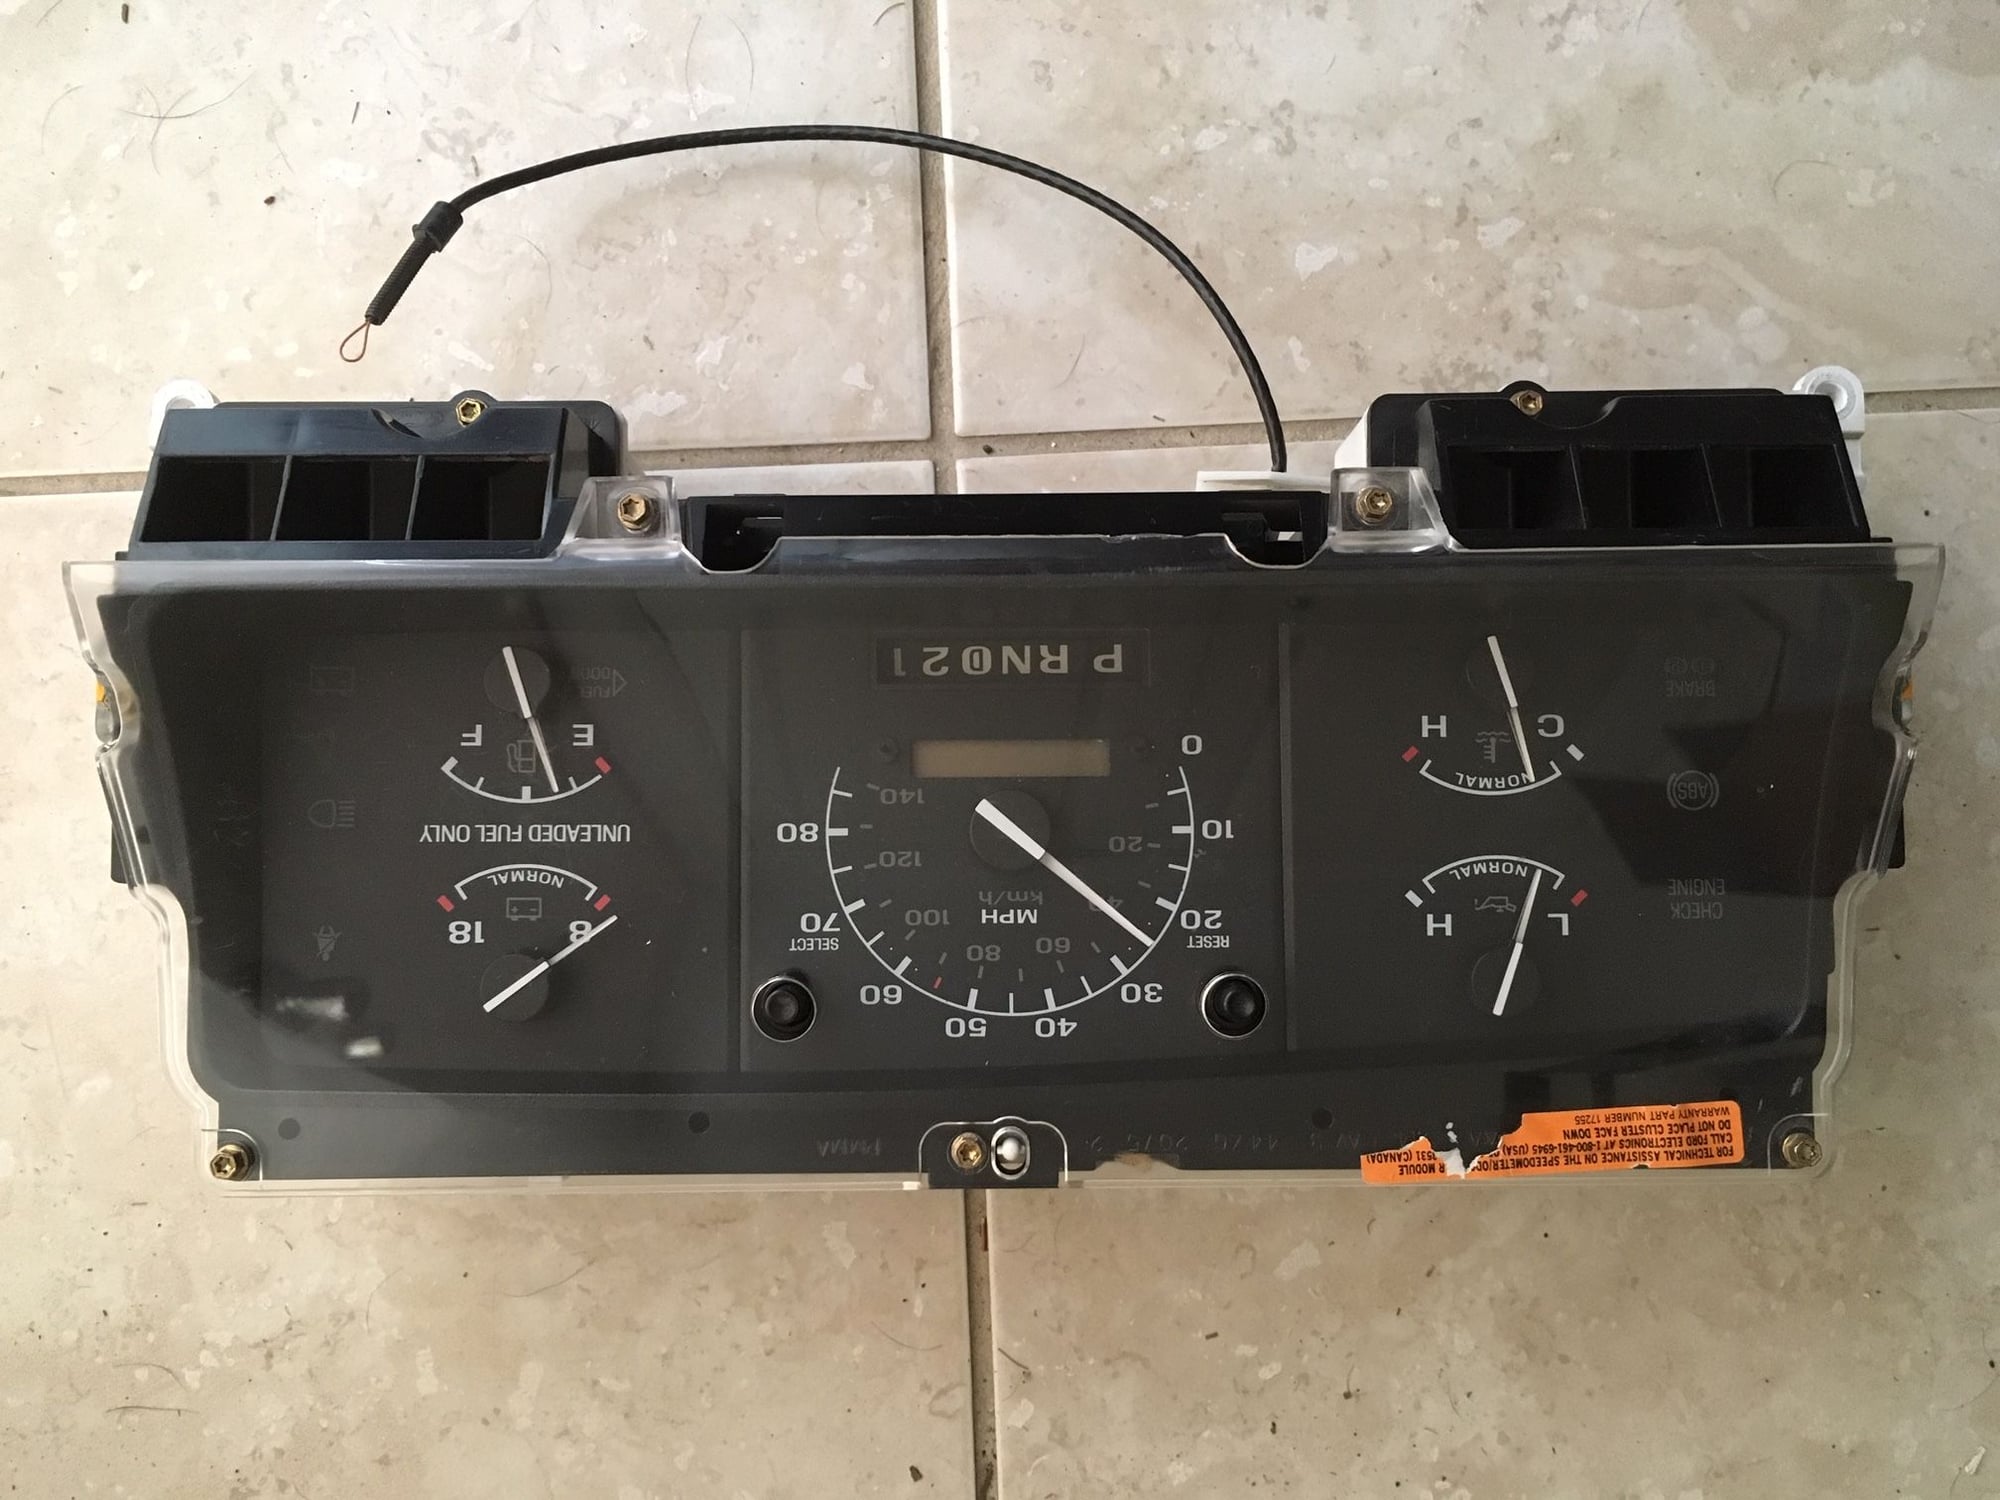 Interior/Upholstery - Instrument cluster from 1995 F150 - Used - 1995 to 1996 Ford F-150 - San Diego, CA 92111, United States